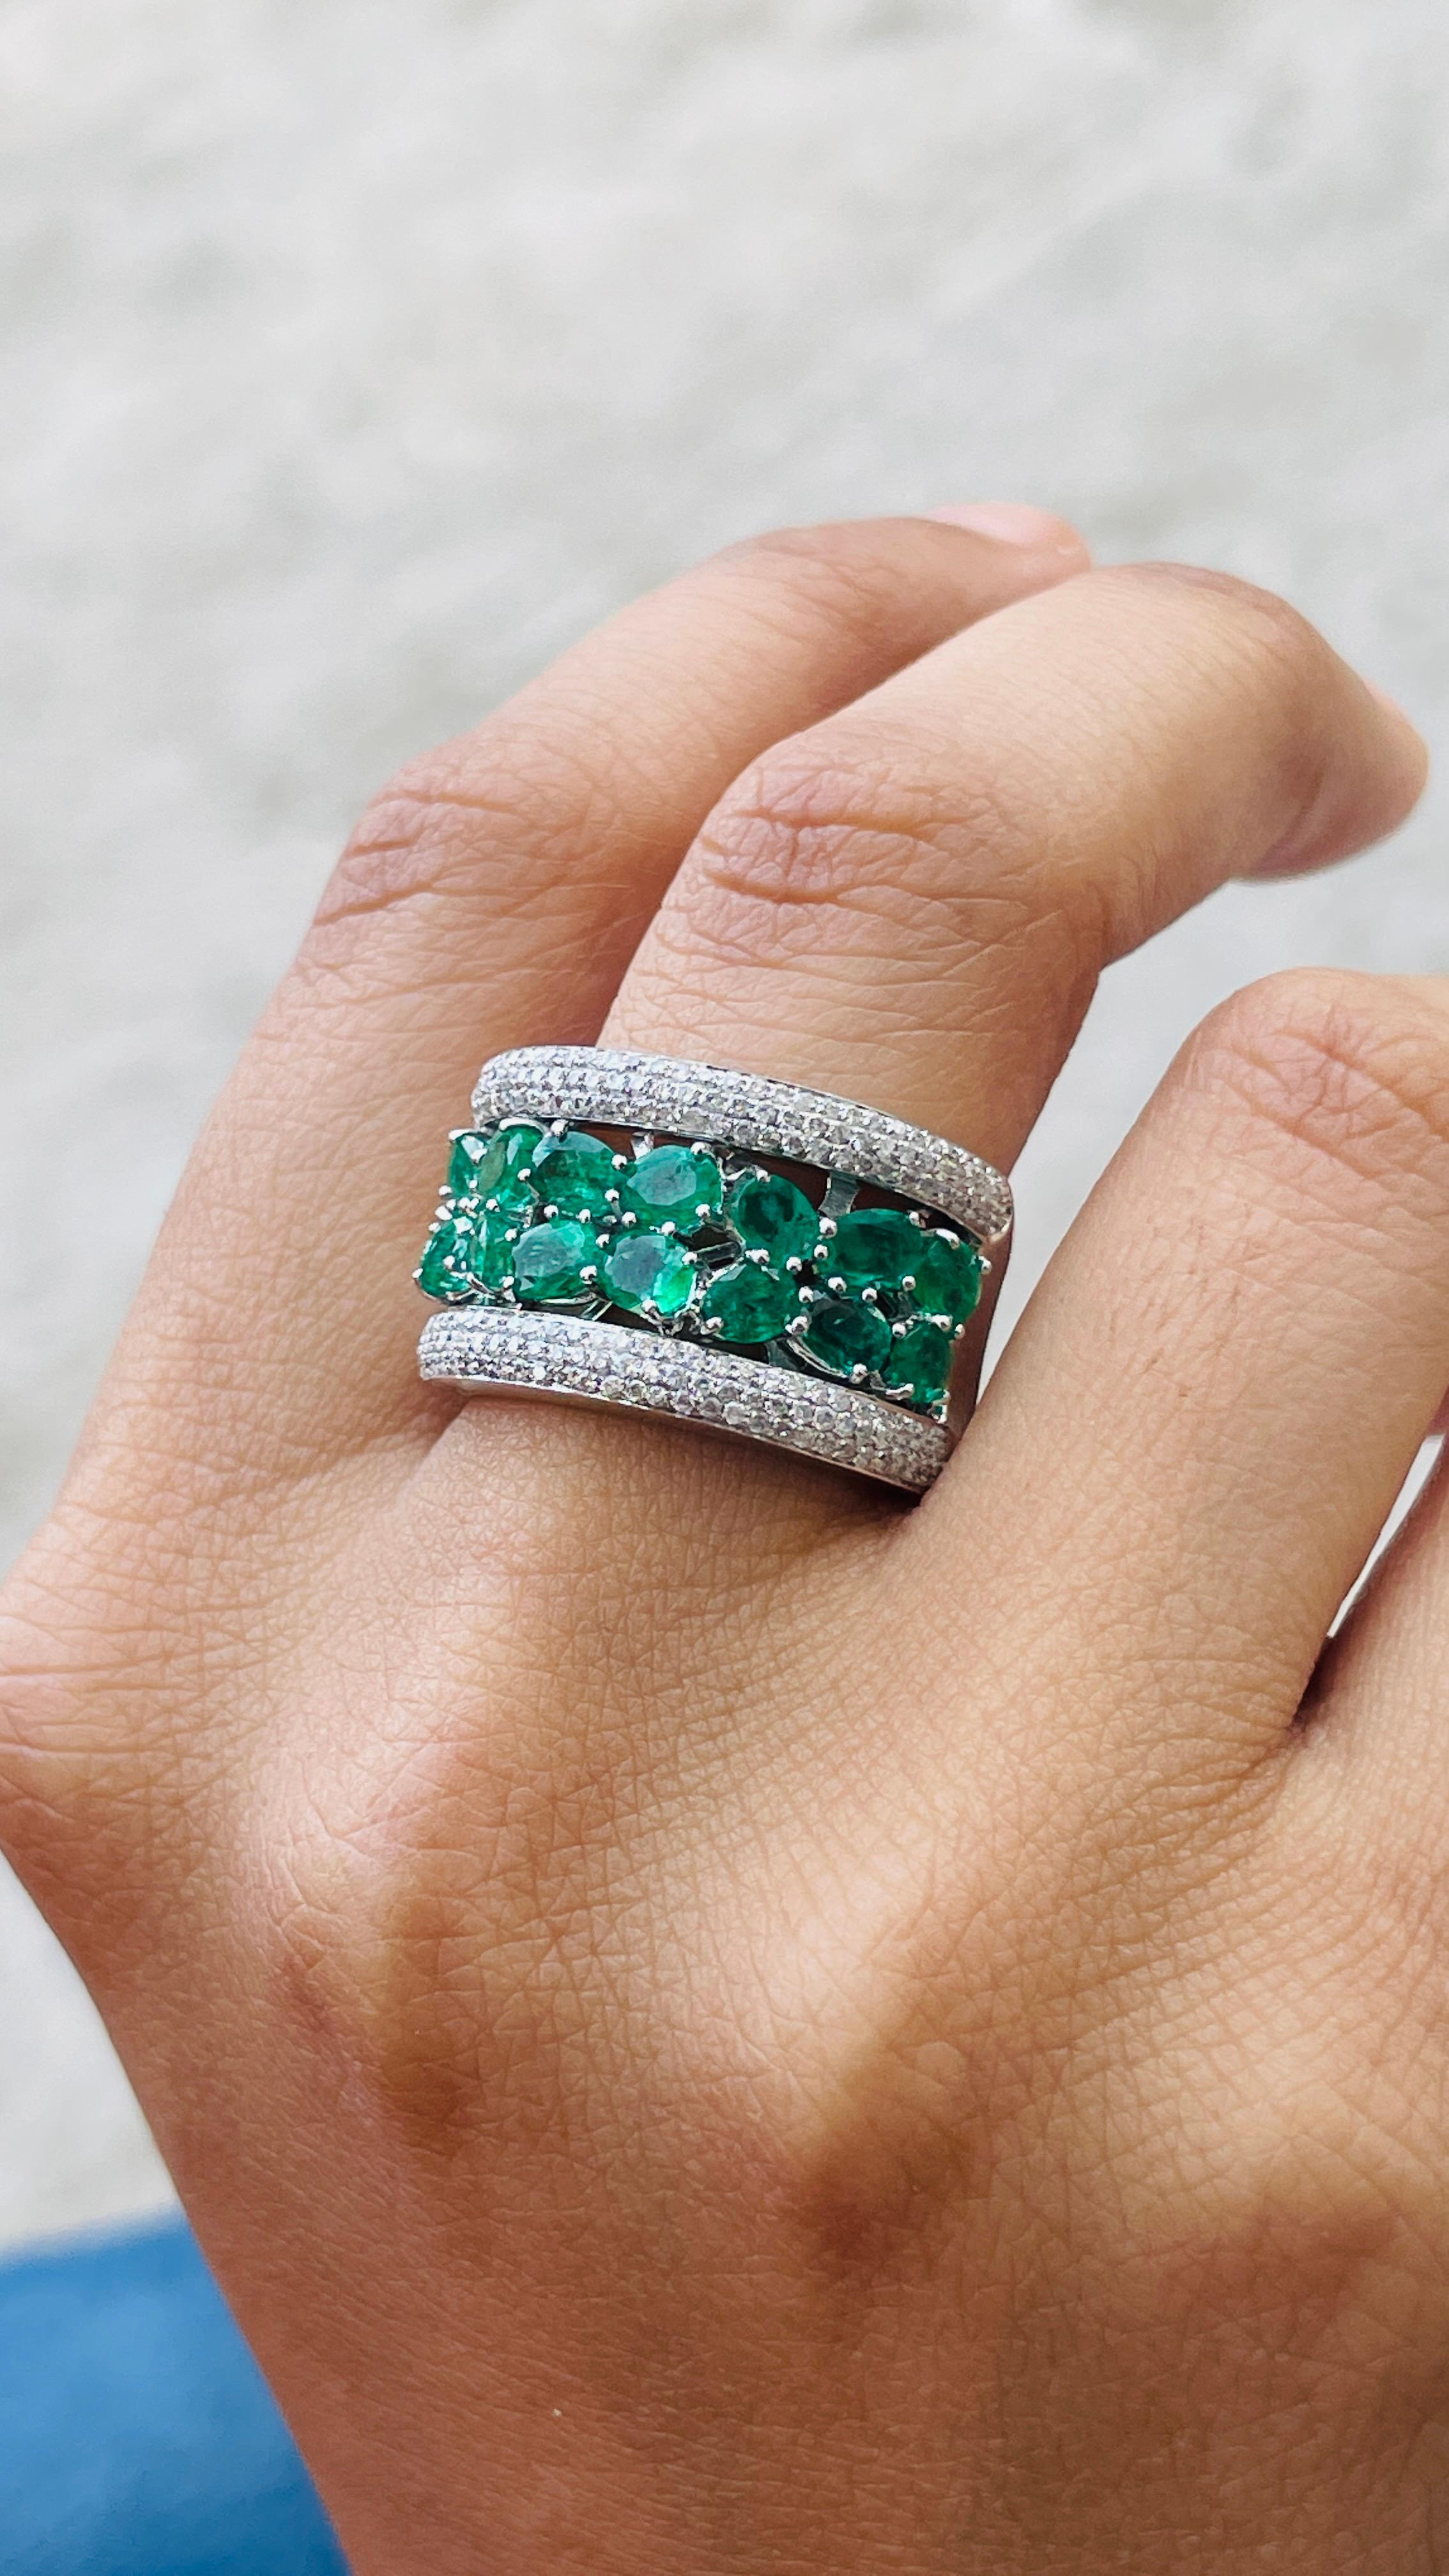 For Sale:  Stylish Emerald Wedding Band Ring with Diamond Solid 18k White Gold Ring  7